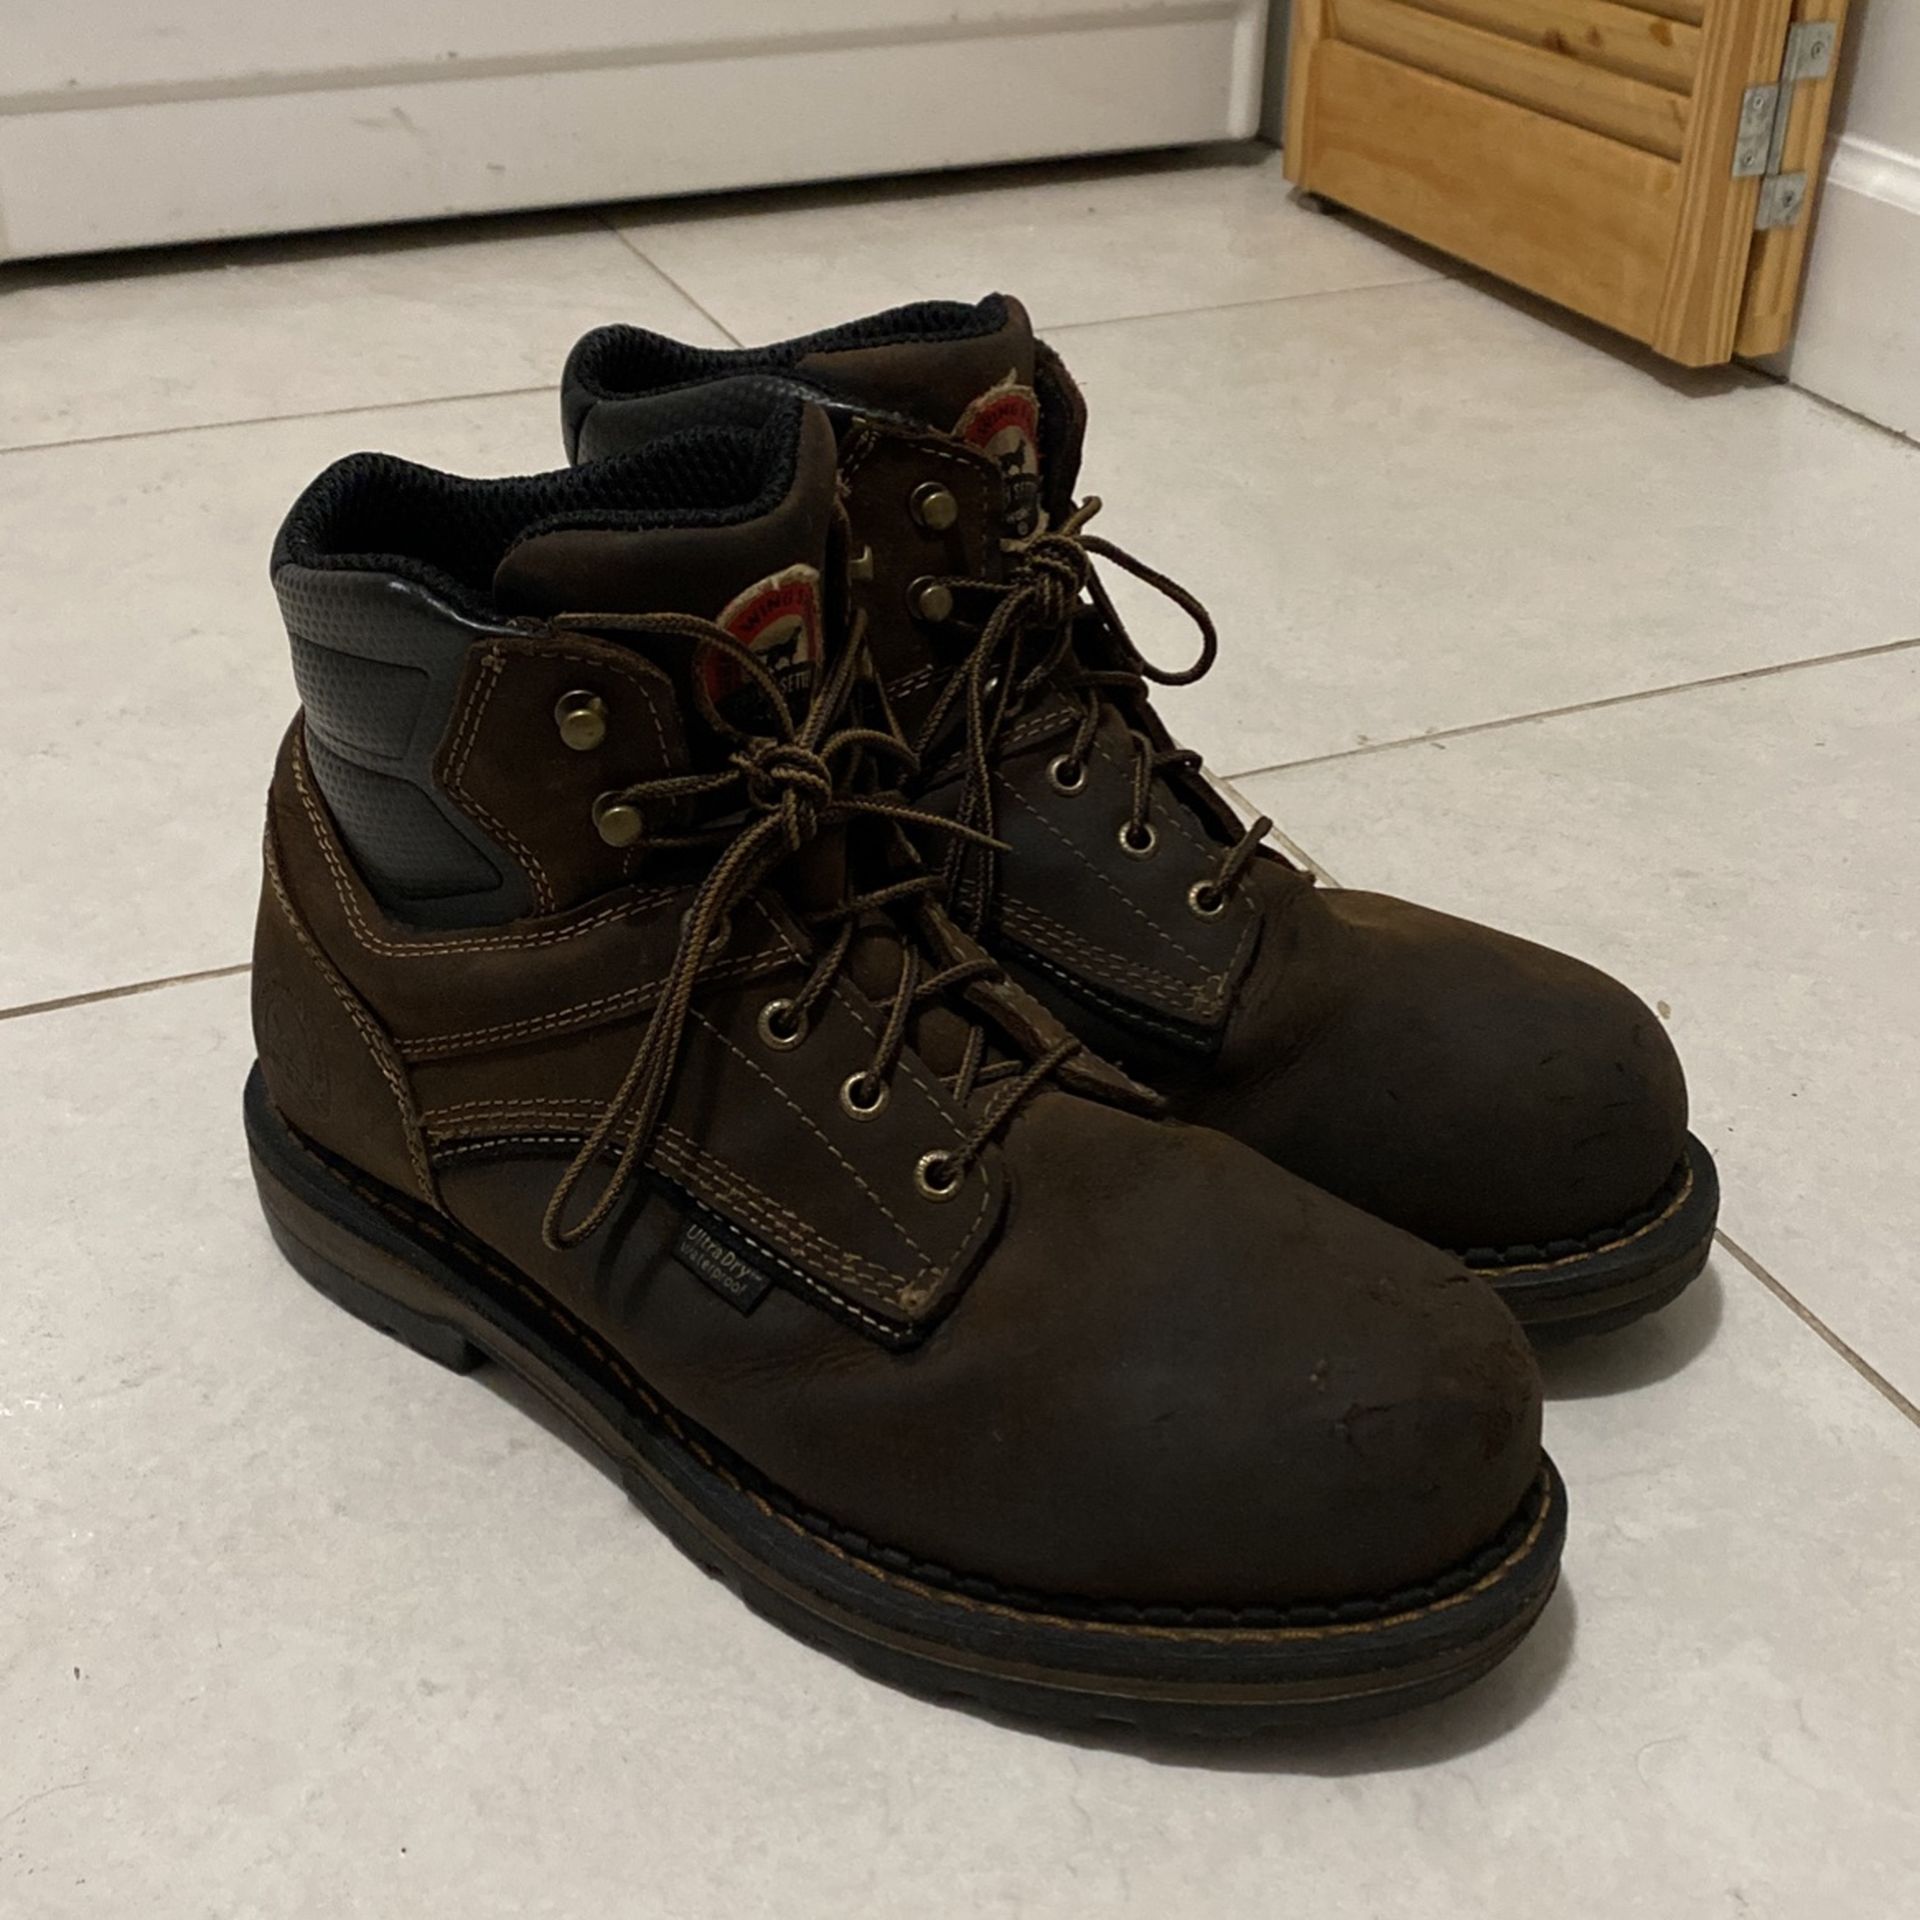 Work Boots Size 11 Red Wing Shoes 